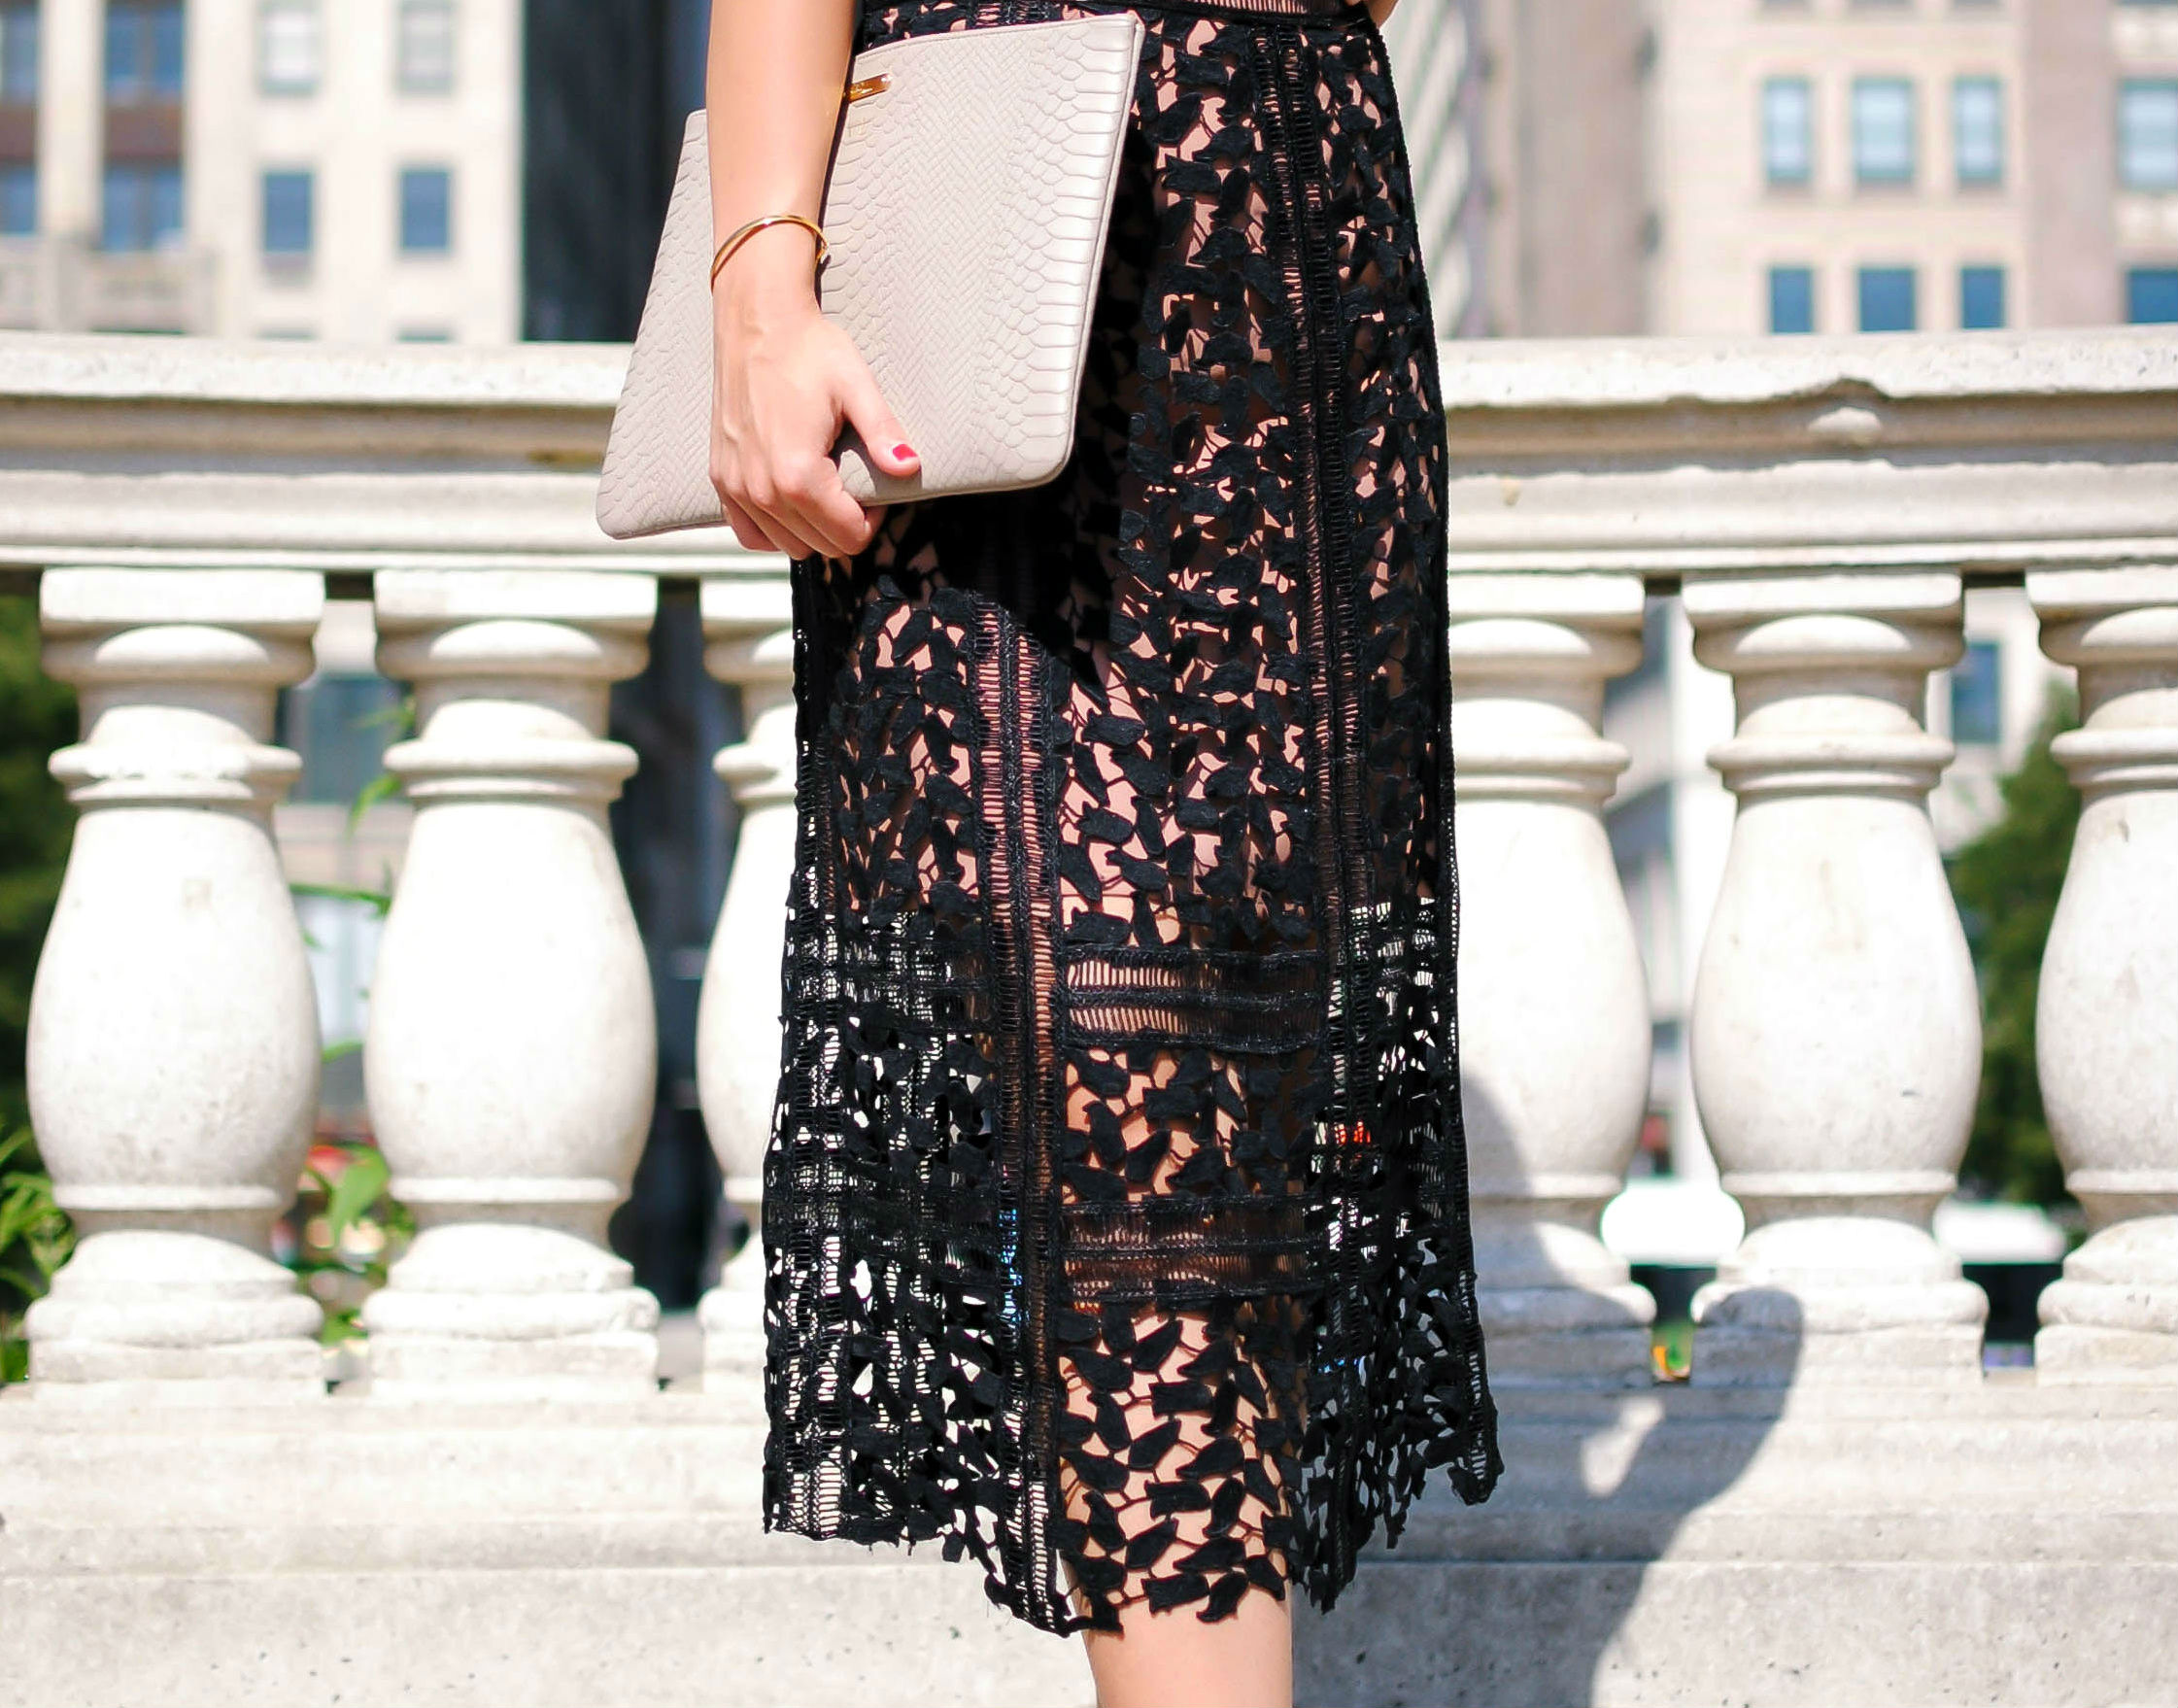 Clost Staple_Lace Skirt_Midi Skirt_Chicwish_What Would V Wear